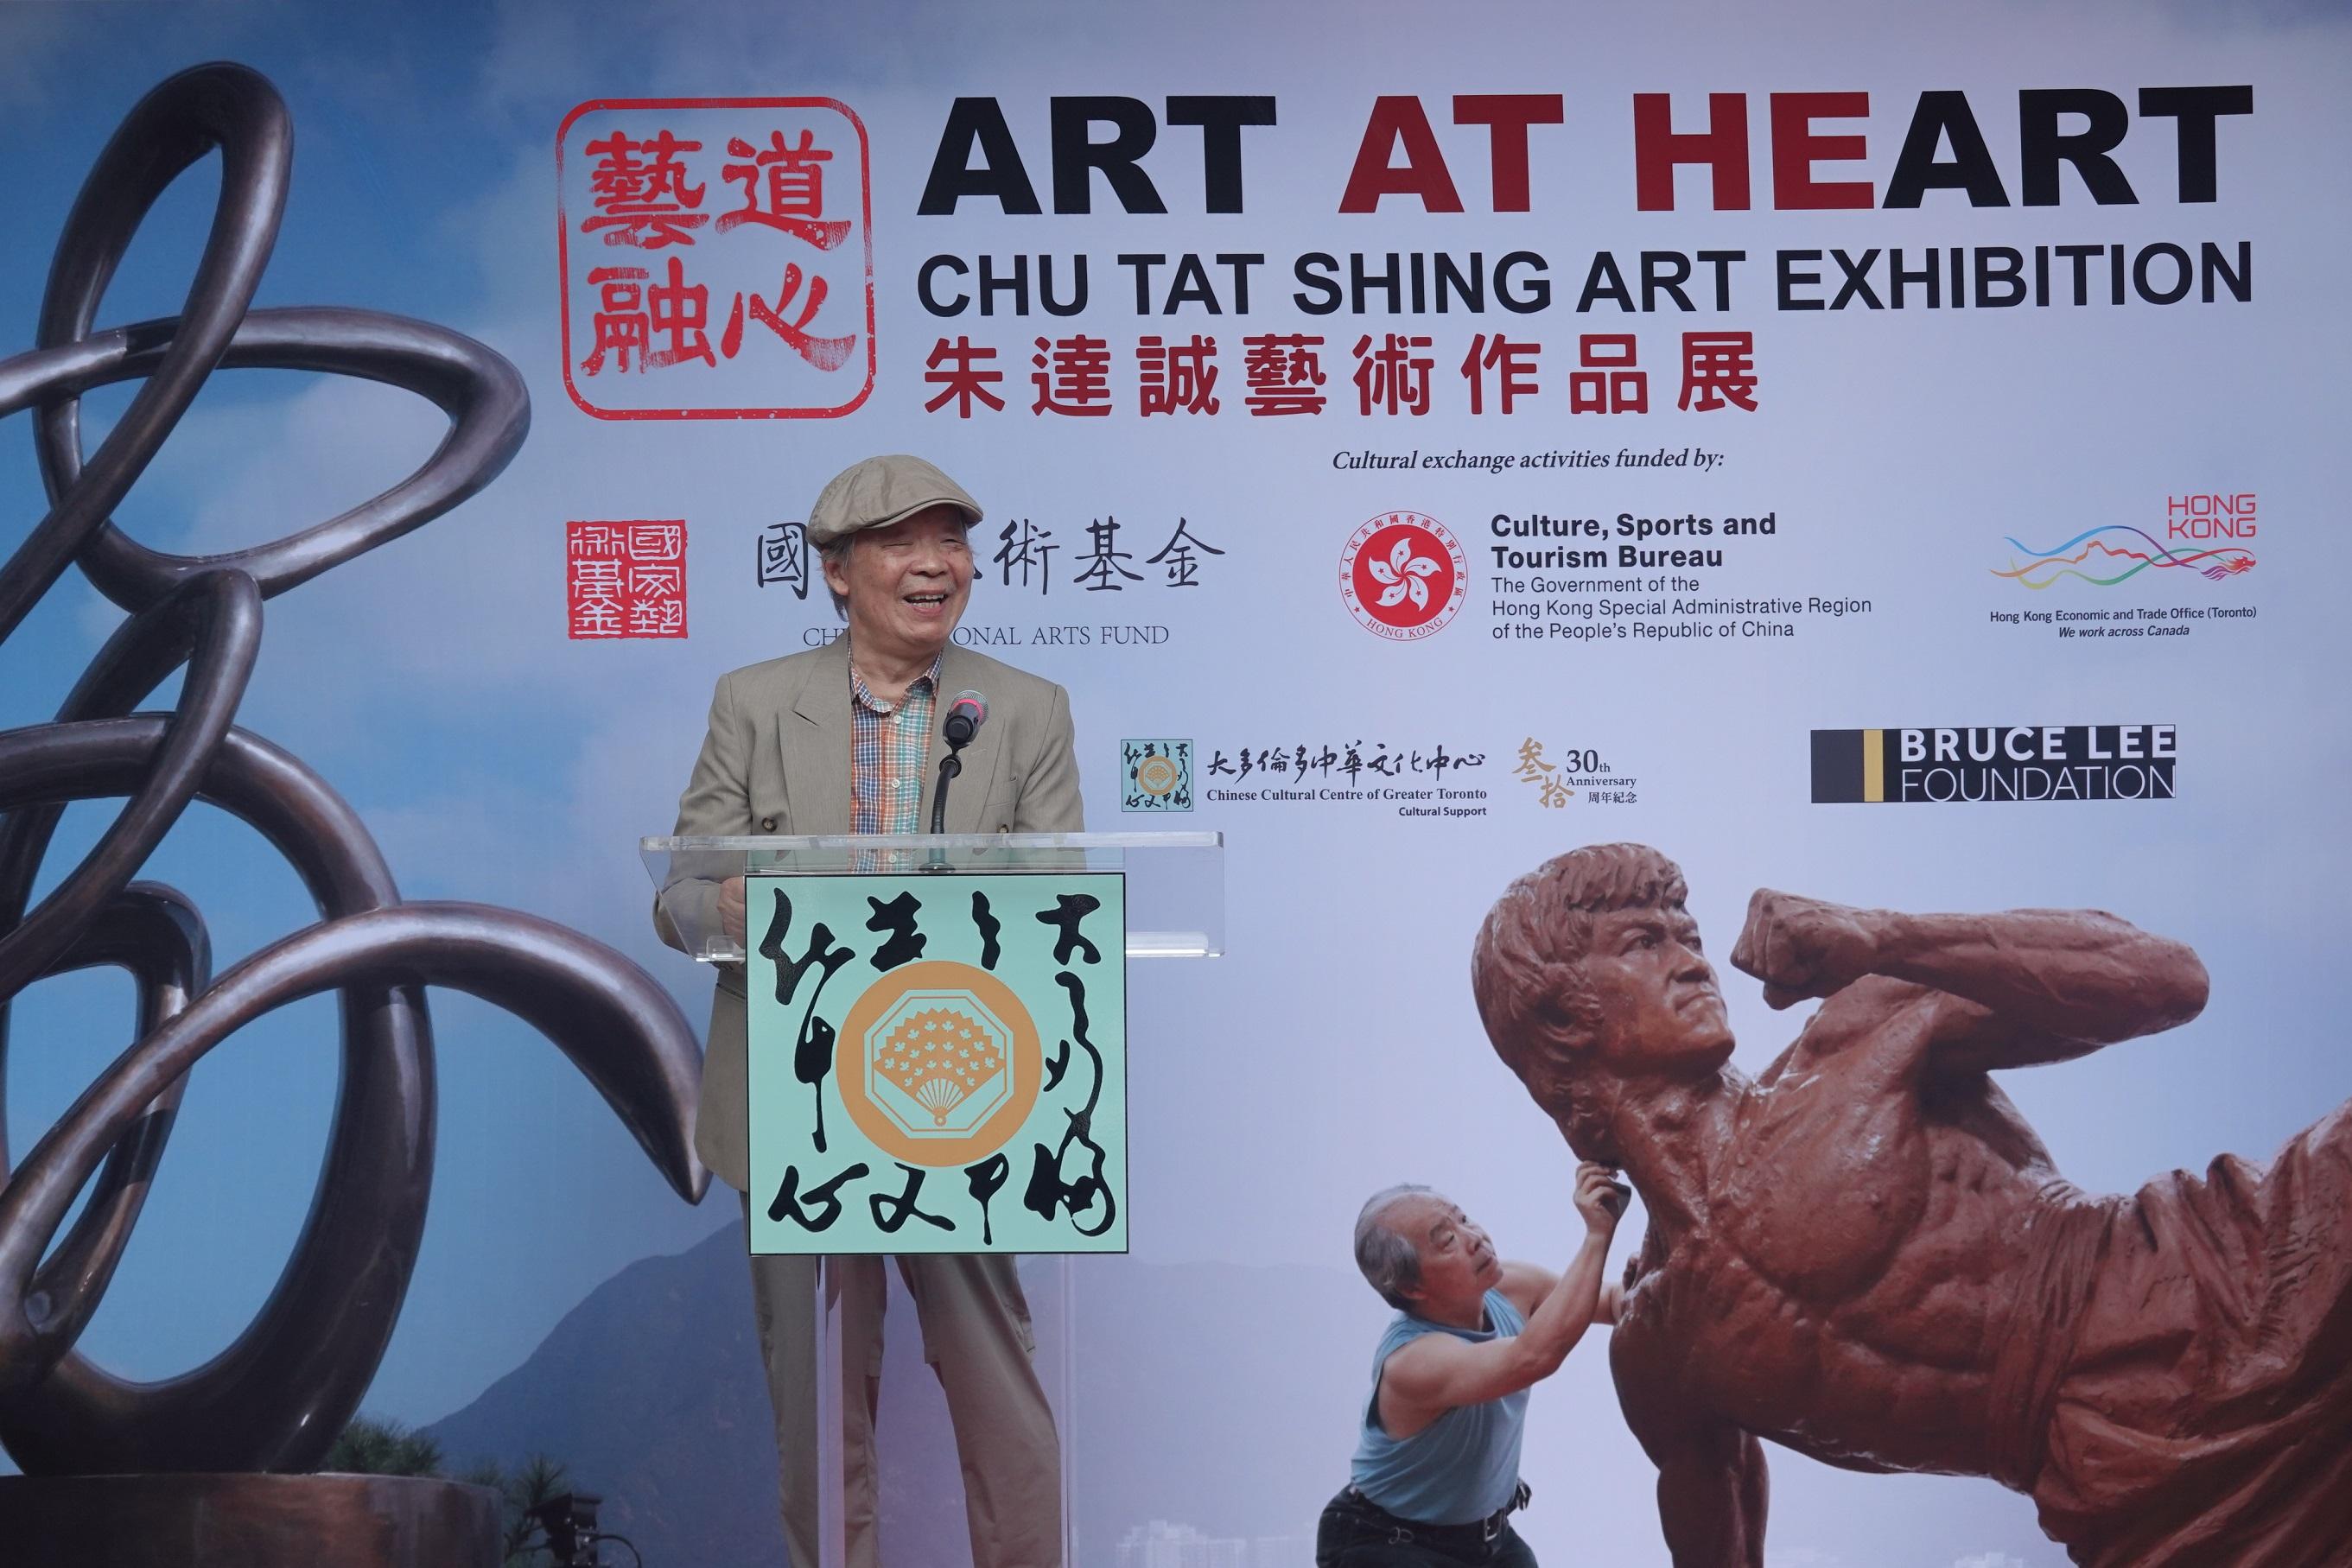 Photo shows renowned artist from Hong Kong Master Chu Tat Shing speaking at the opening ceremony of "Art at Heart - Chu Tat Shing Art Exhibition" on August 3 (Toronto time).